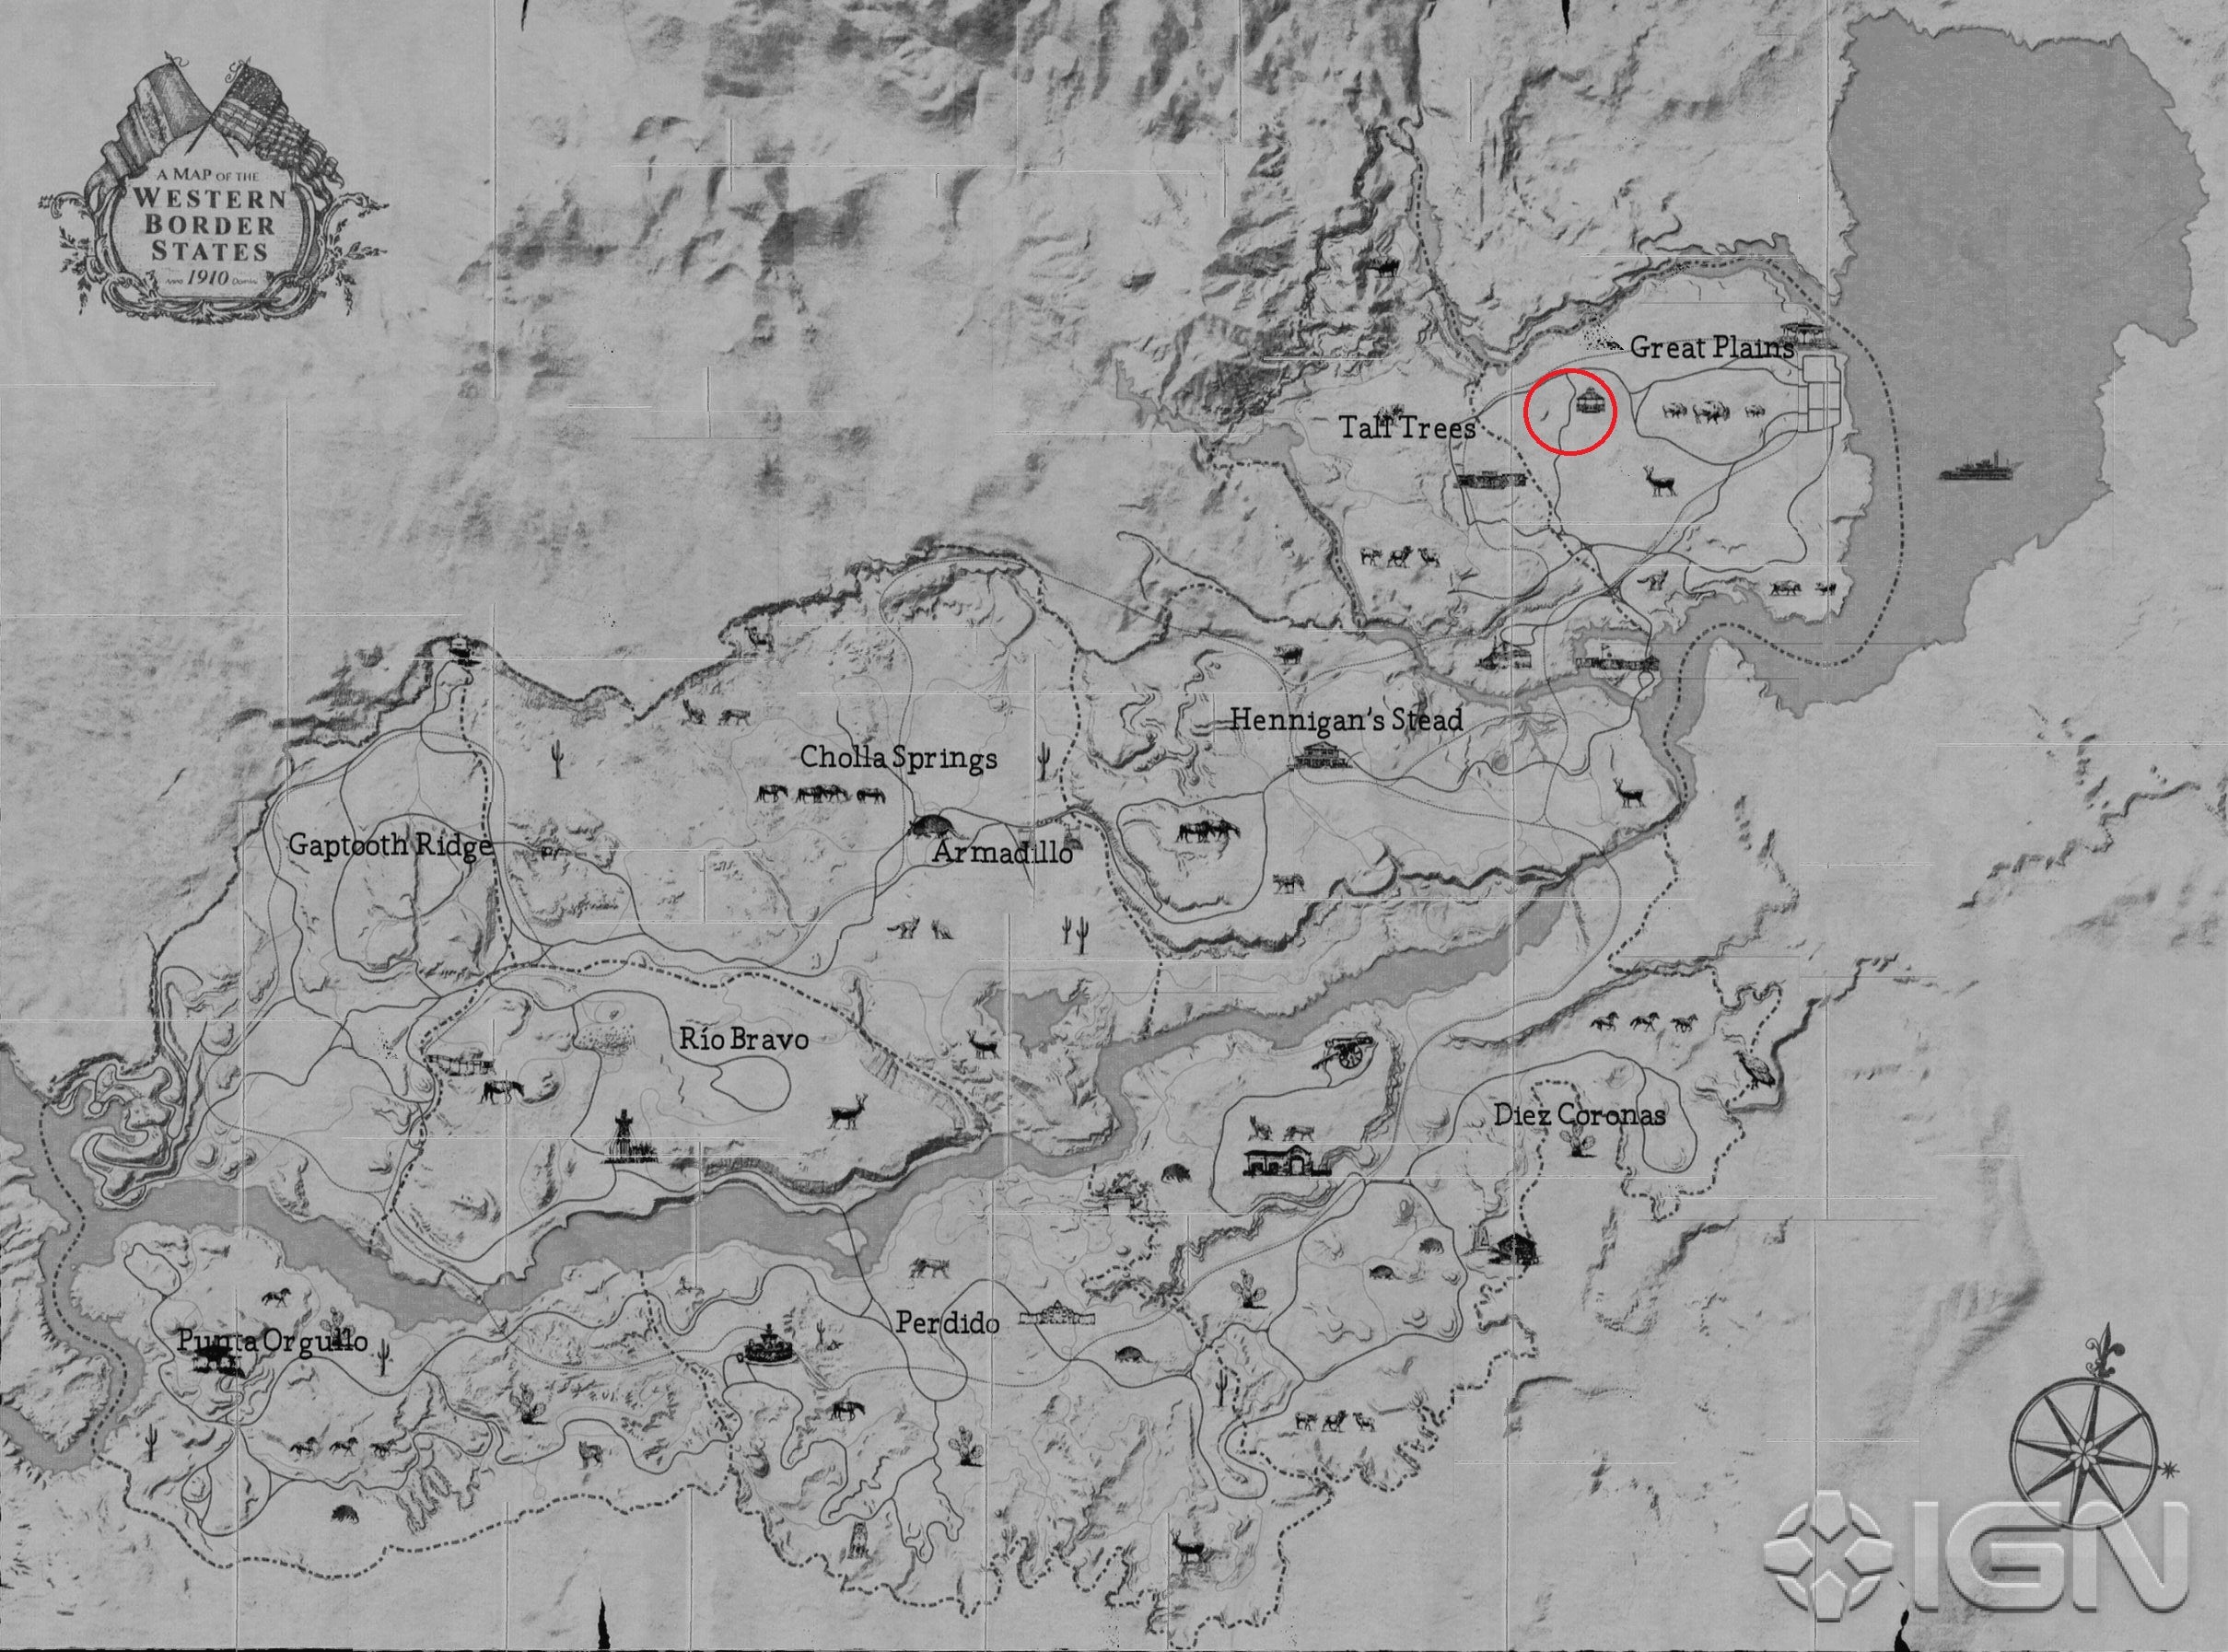 Red Dead Redemption 2 leaked map appears to be genuine | VG247